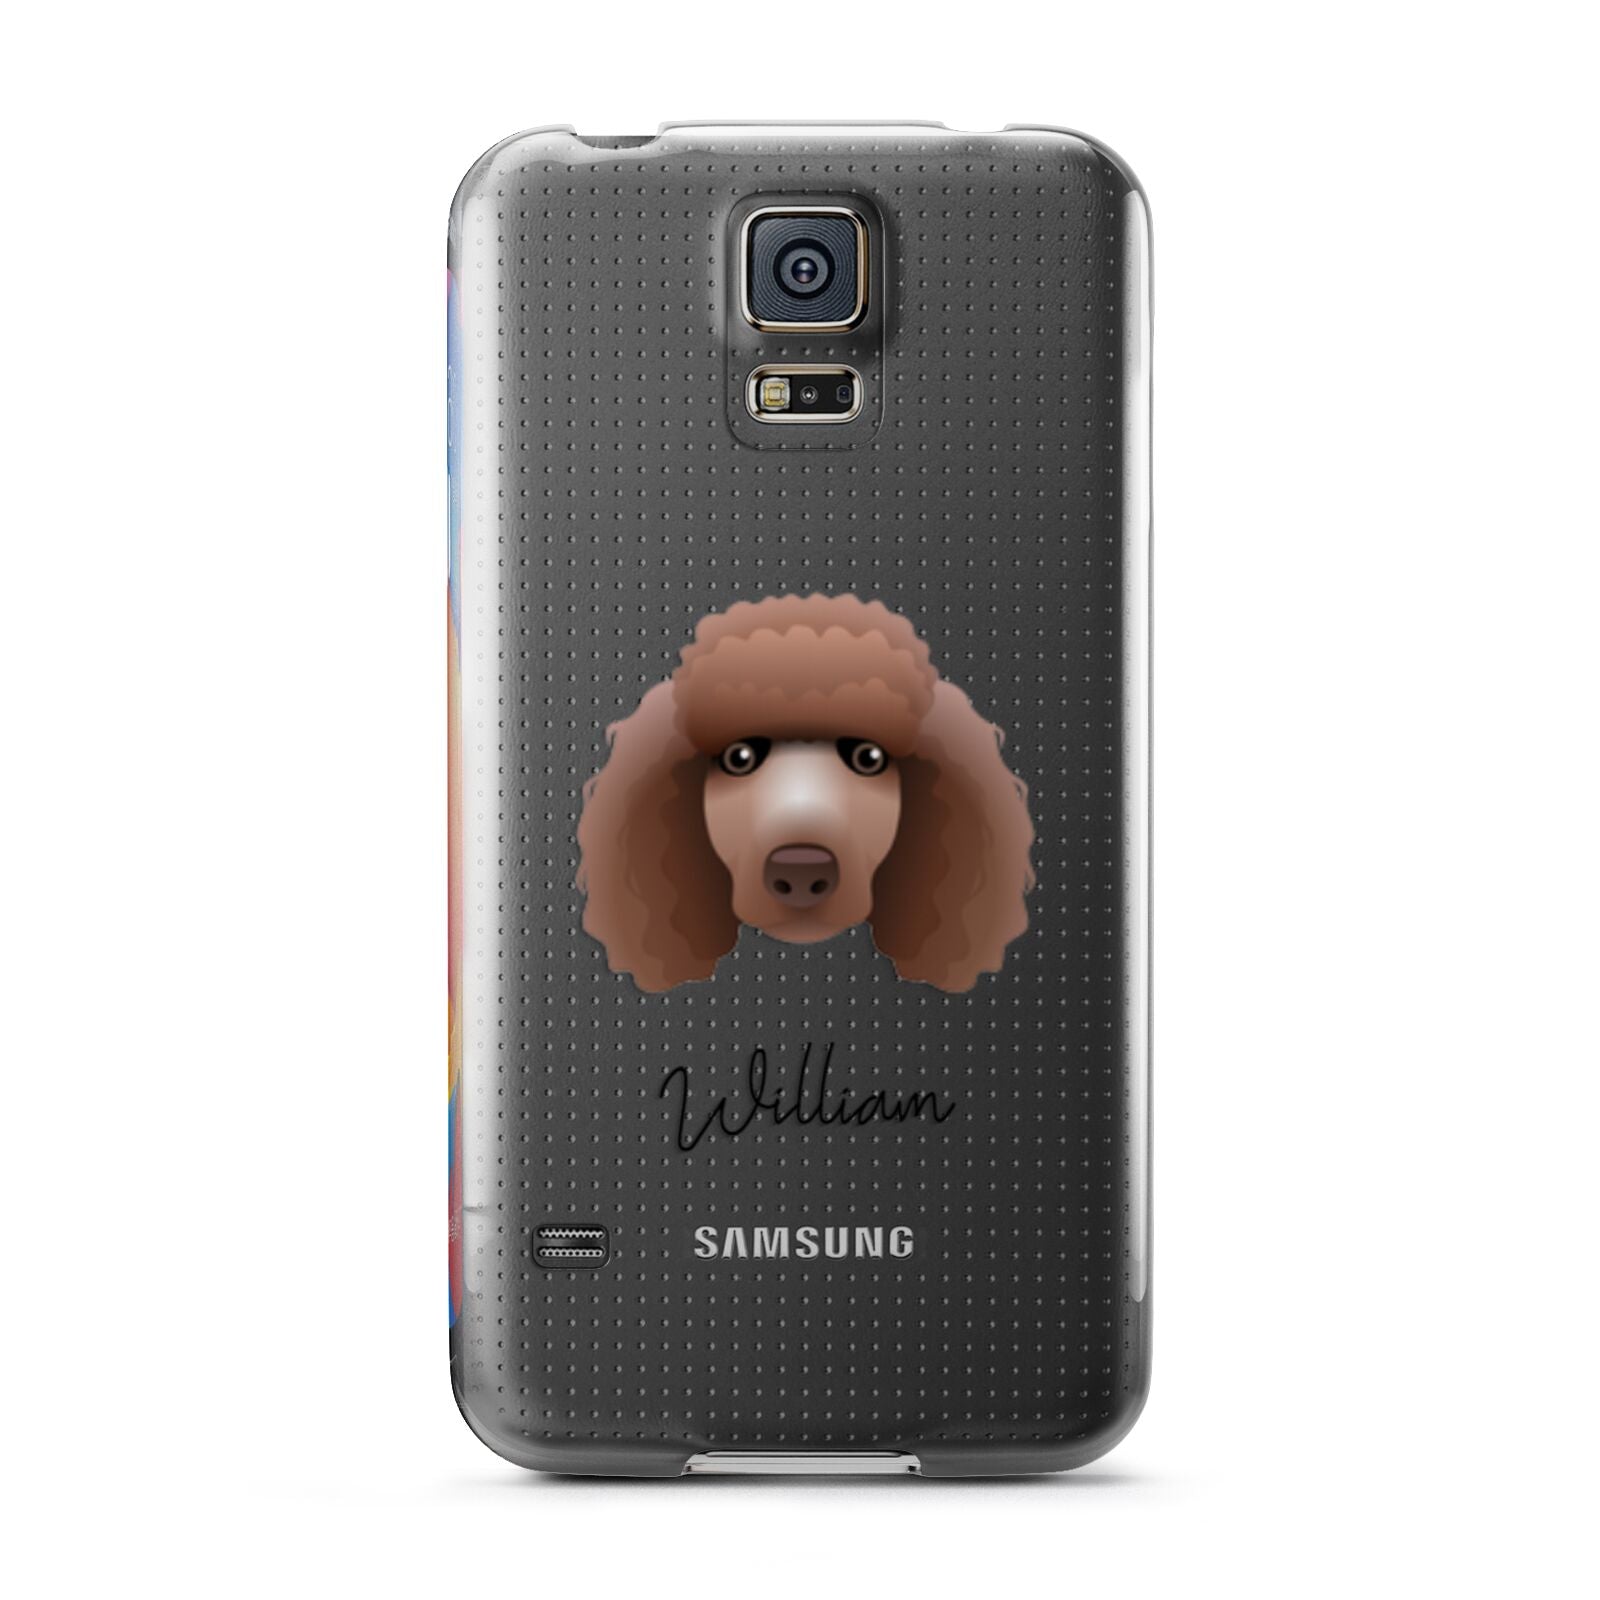 Poodle Personalised Samsung Galaxy S5 Case